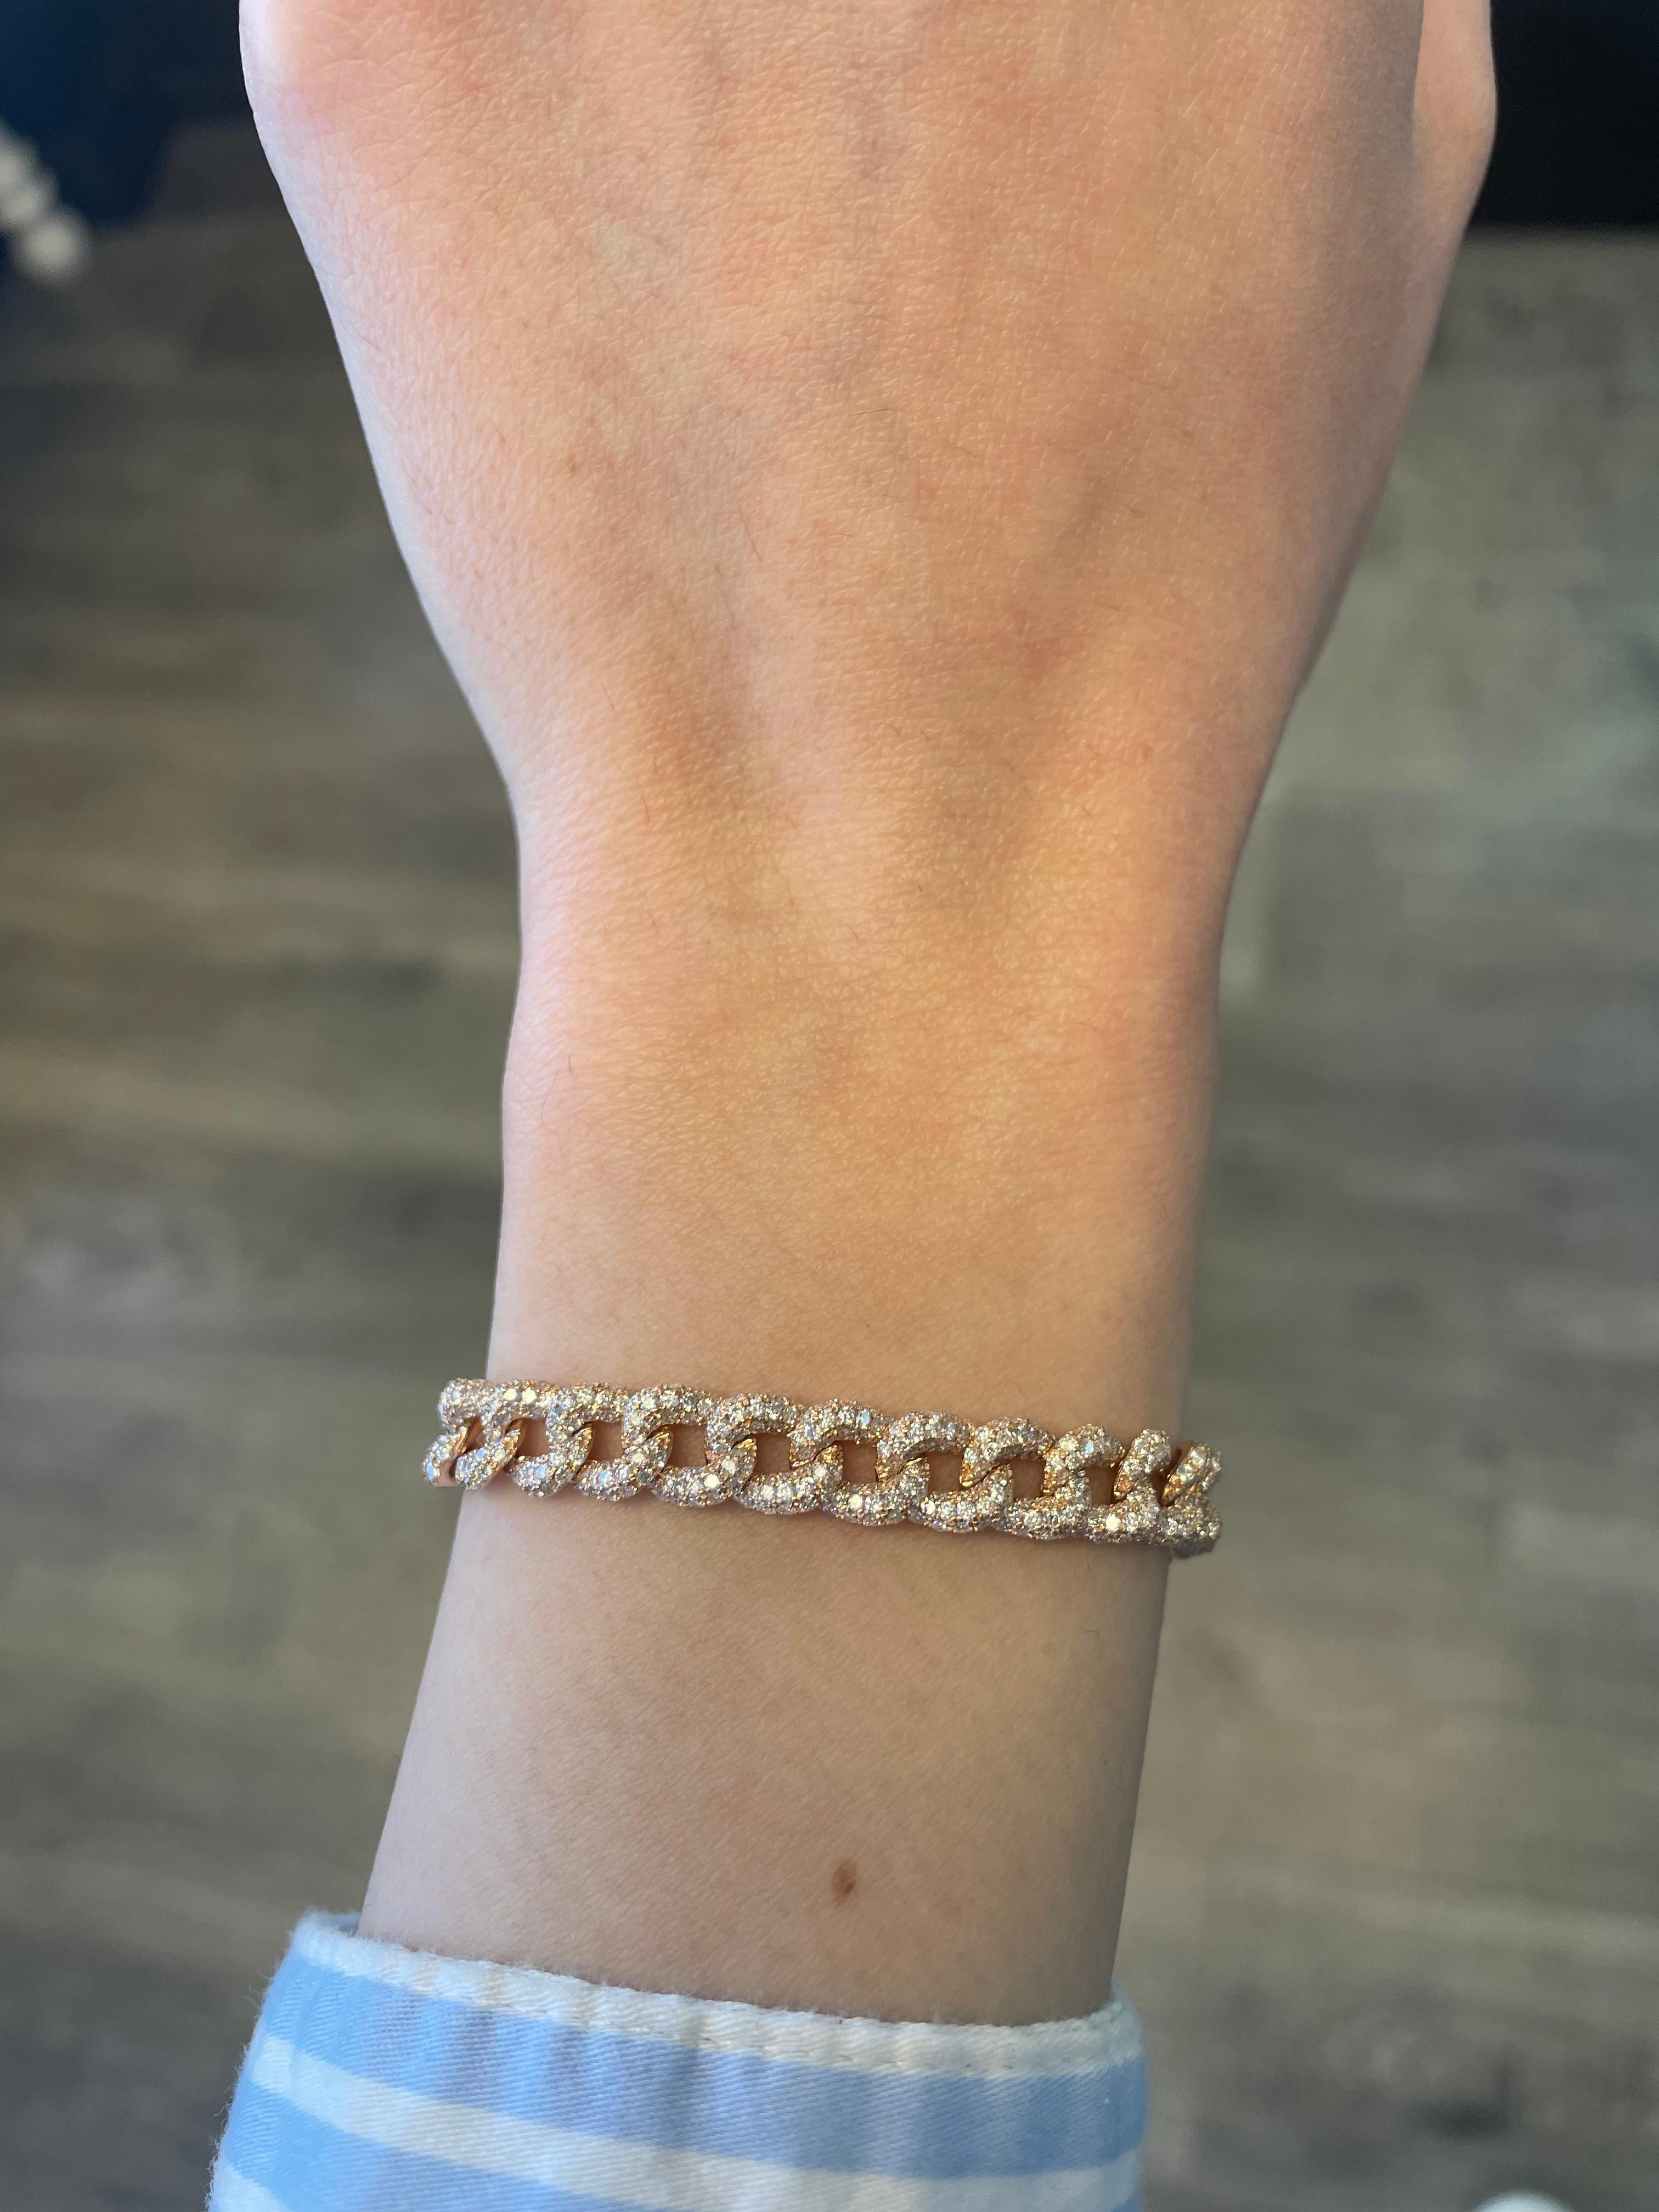 Modern diamond cuban link bracelet. By Alexander Beverly Hills.
1043 round brilliant diamonds, 6.24 carats total. Approximately G/H color and VS2/SI1 clarity. 18k rose gold, 18.77 grams, and 7mm width.
Accommodated with an up-to-date appraisal by a